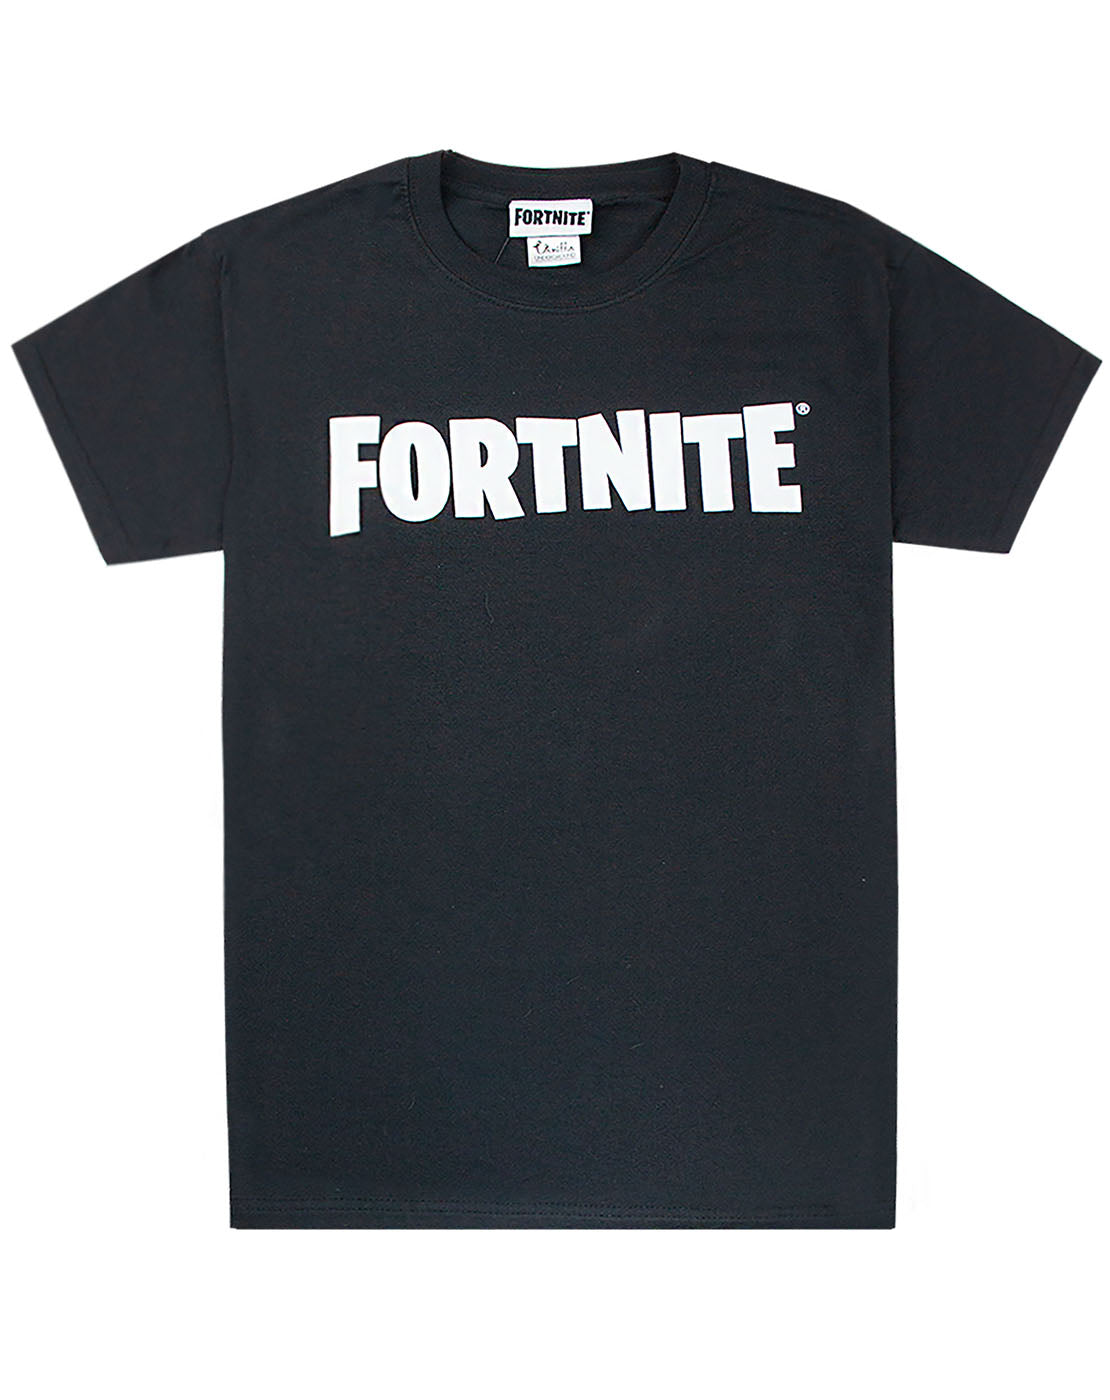  Fortnite: Clothing & Accessories